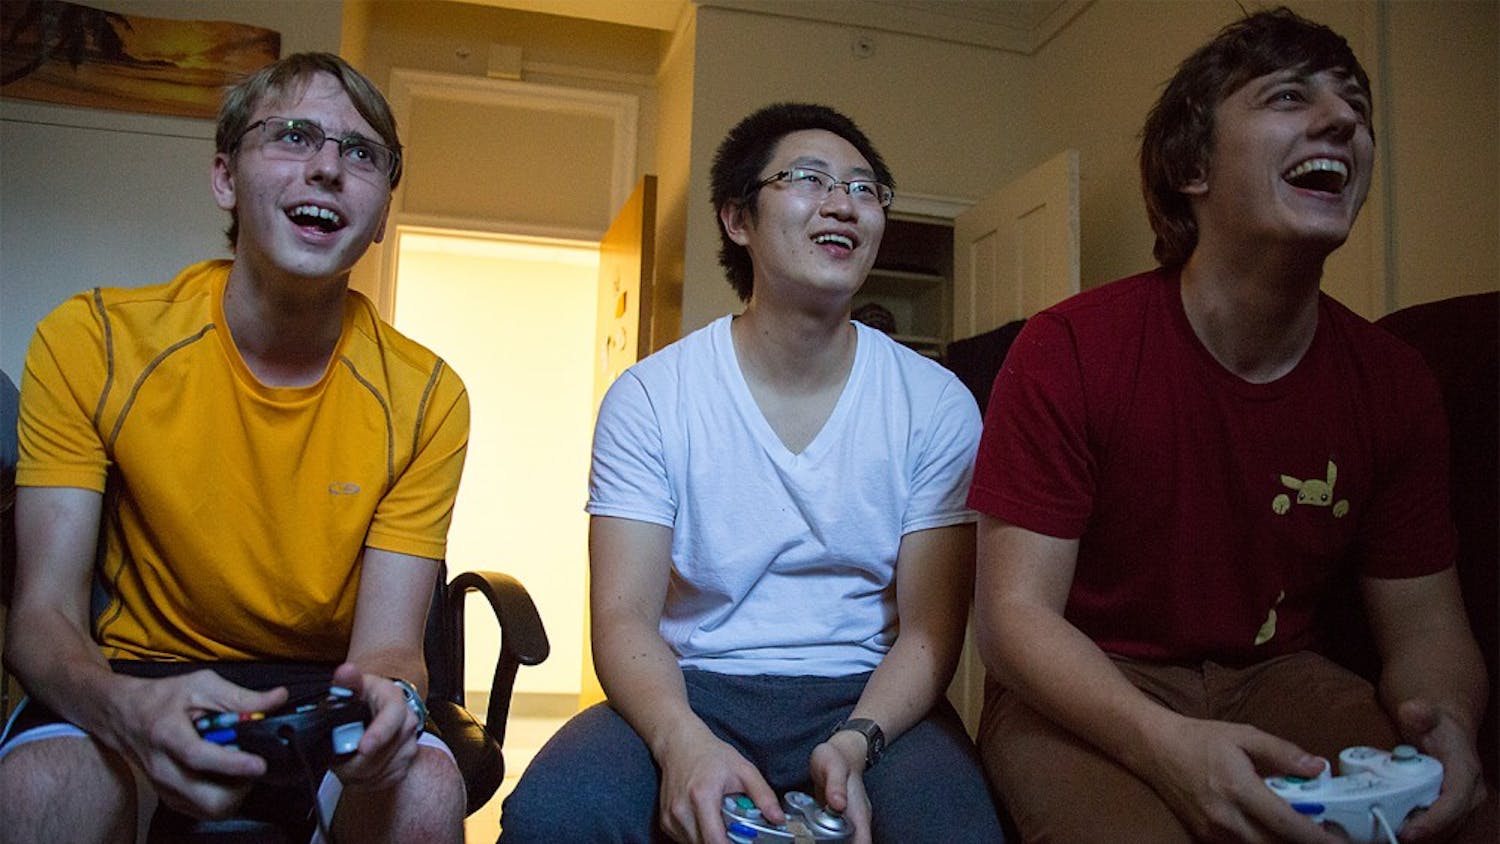 Freshman Jimmy Messmer, left, graduate student Weilin Zou, and senior Tyler Crews play the video game Super Smash Bros. in an Everett dorm room. Inspired by the 2013 film "Super Smash Bros.," members compete against one another in each others dorm rooms, referred to as "smash houses" by the group, and in common areas where a television is present.